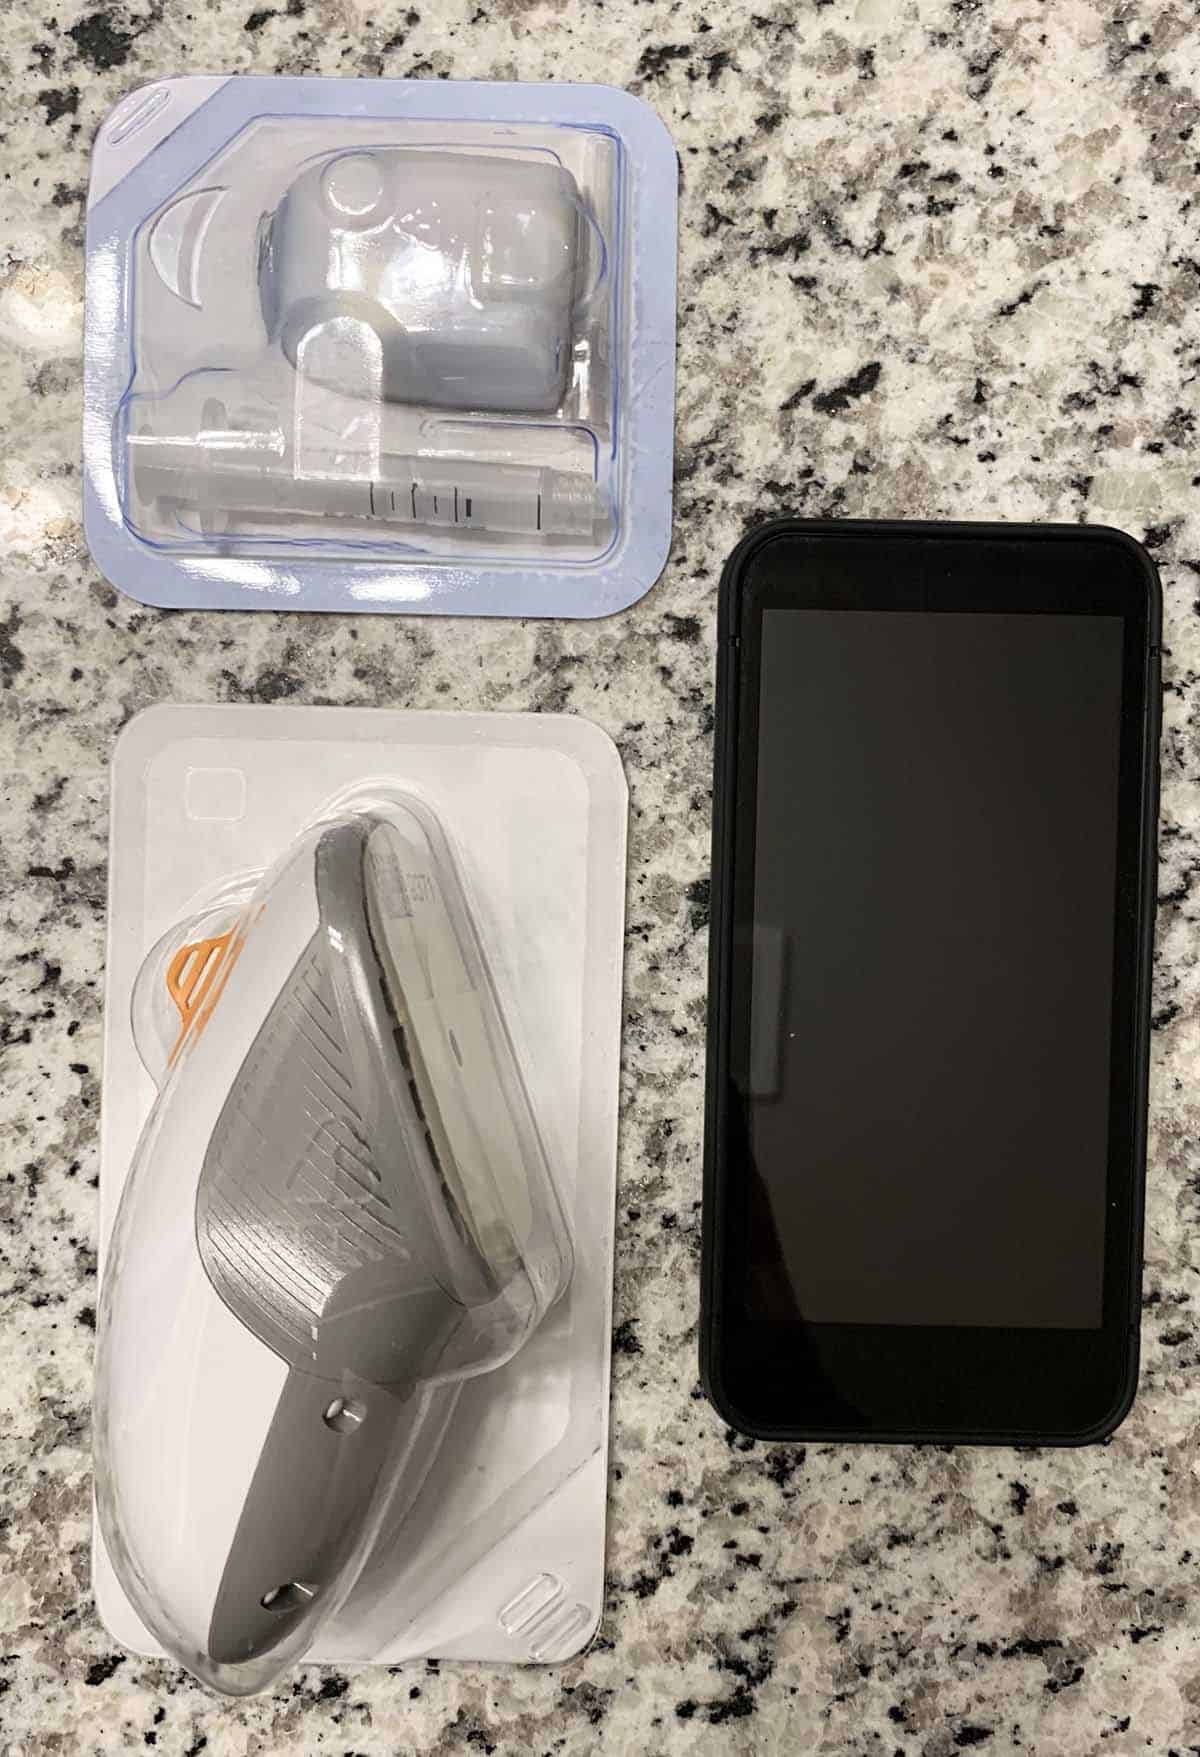 Omnipod 5, Dexcom 6 CGM, and an mobile phone on a table